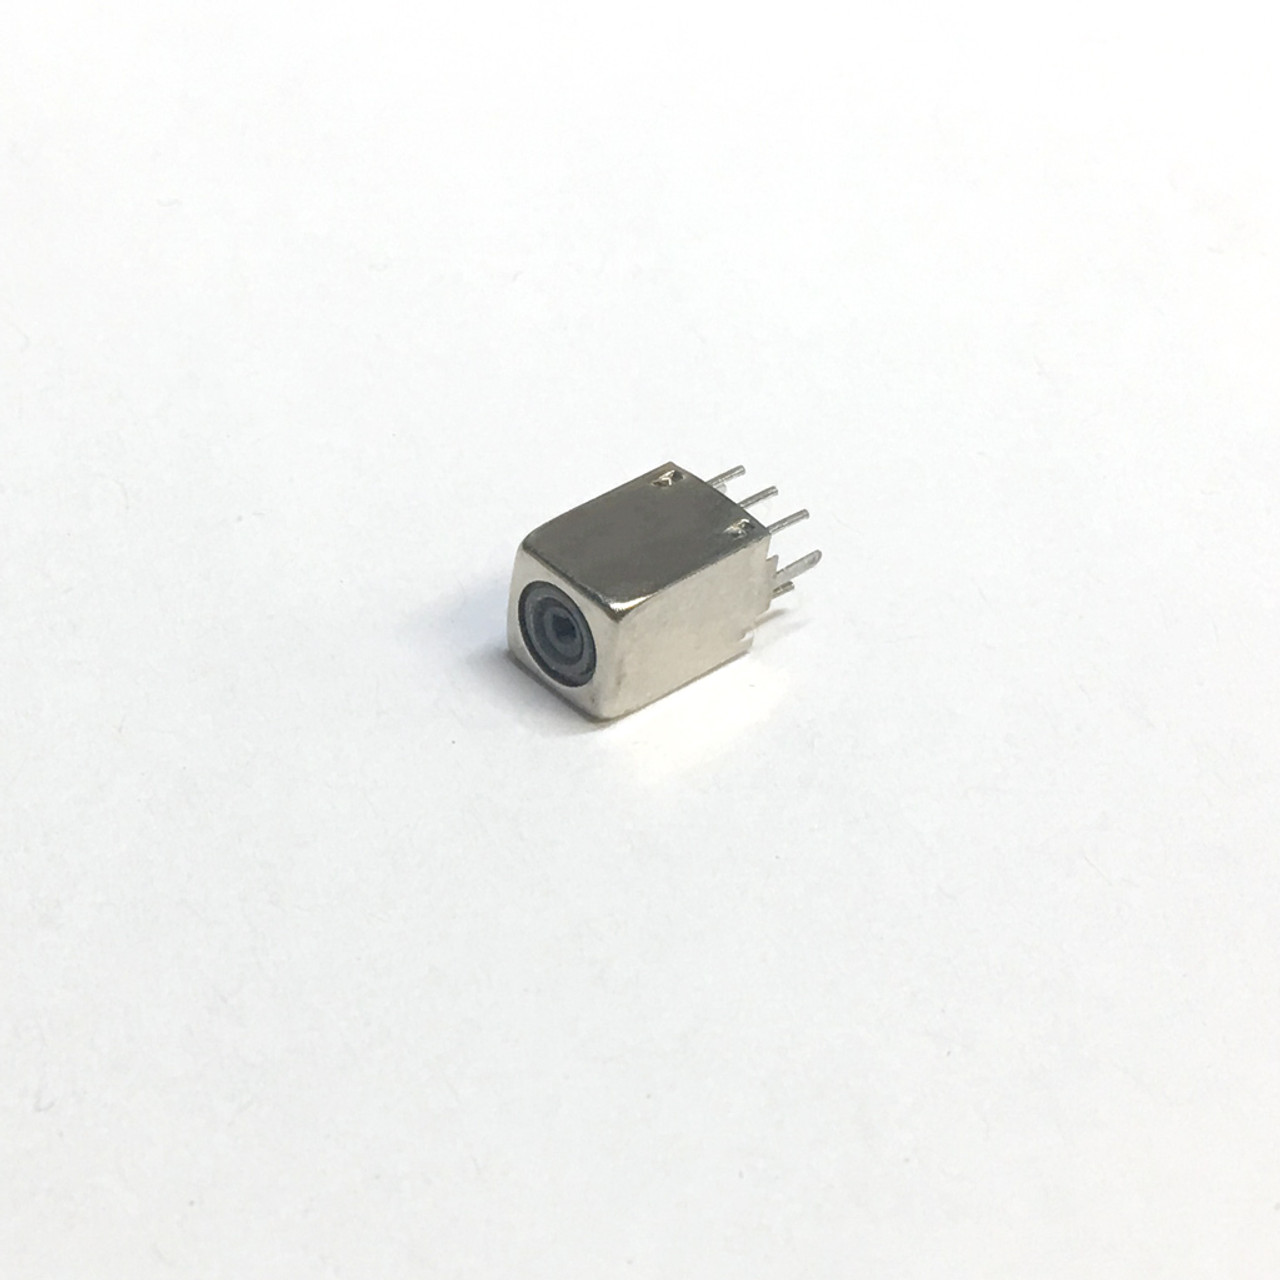 Tuning Inductor - For high power DRSSTC Tesla Coils